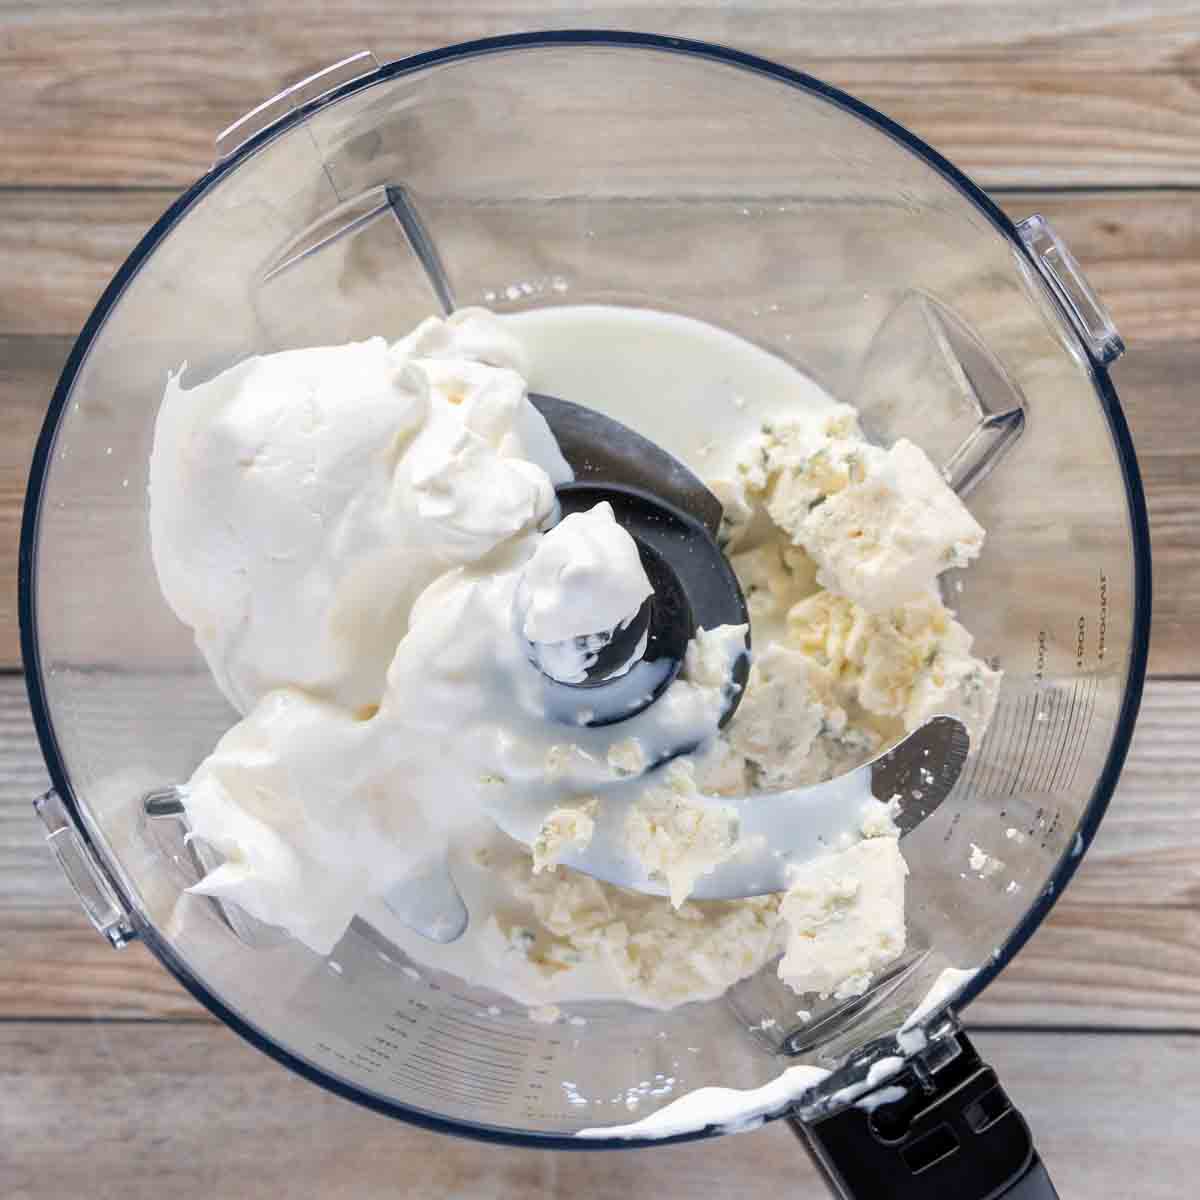 sour cream, bleu cheese and milk in the bowl of a food processor